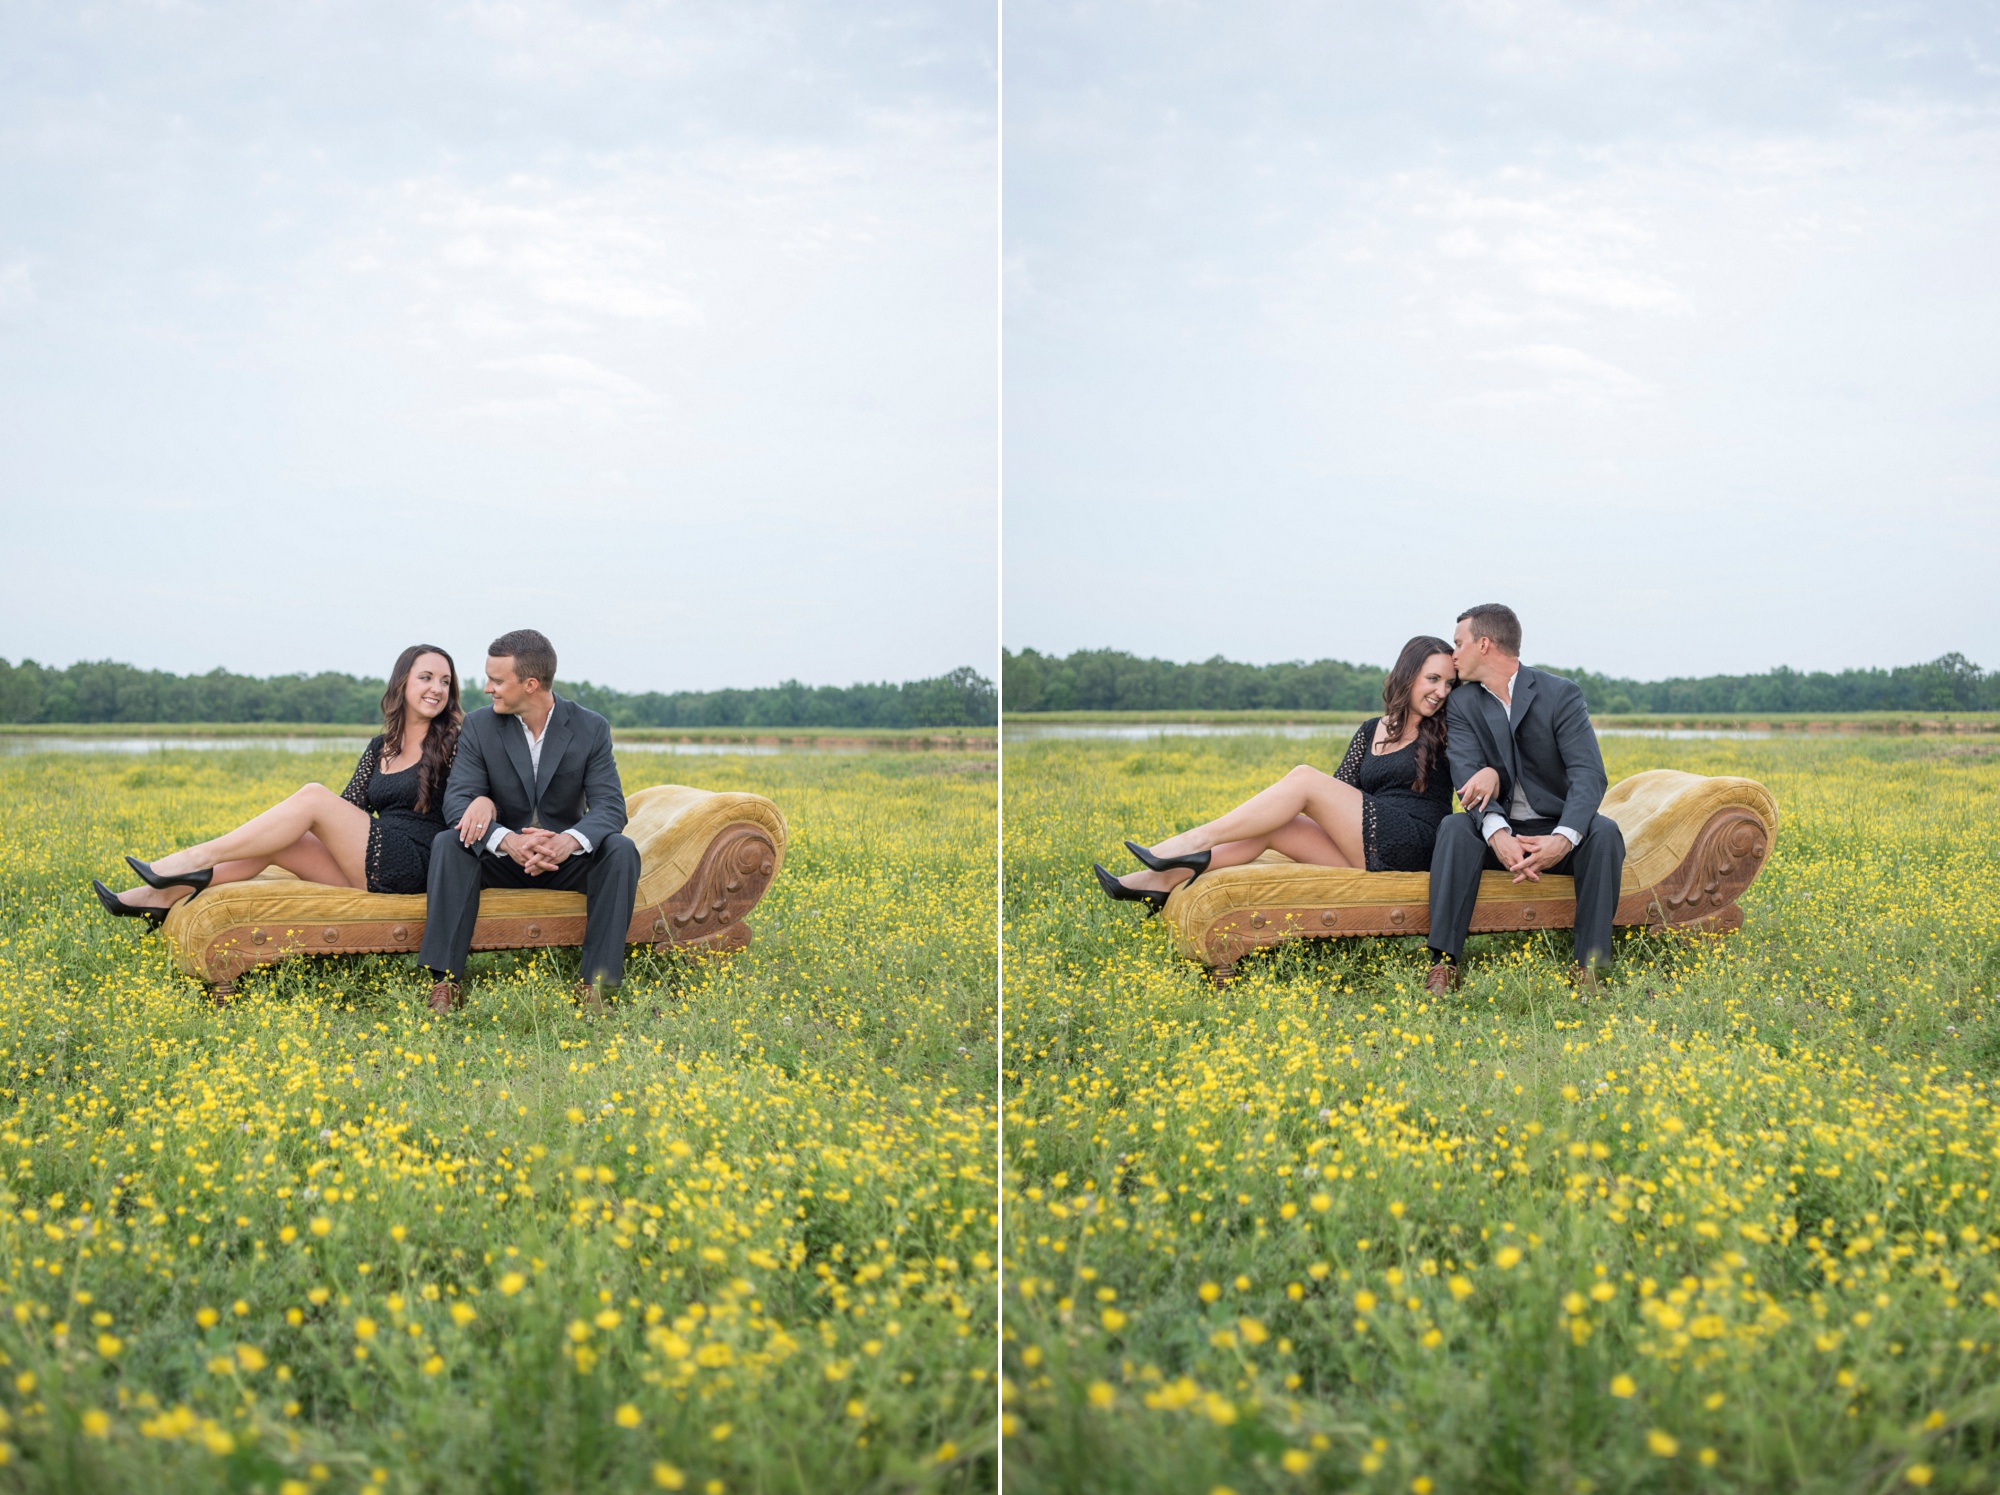 Photos of bride and groom sitting on couch in field of yellow flowers